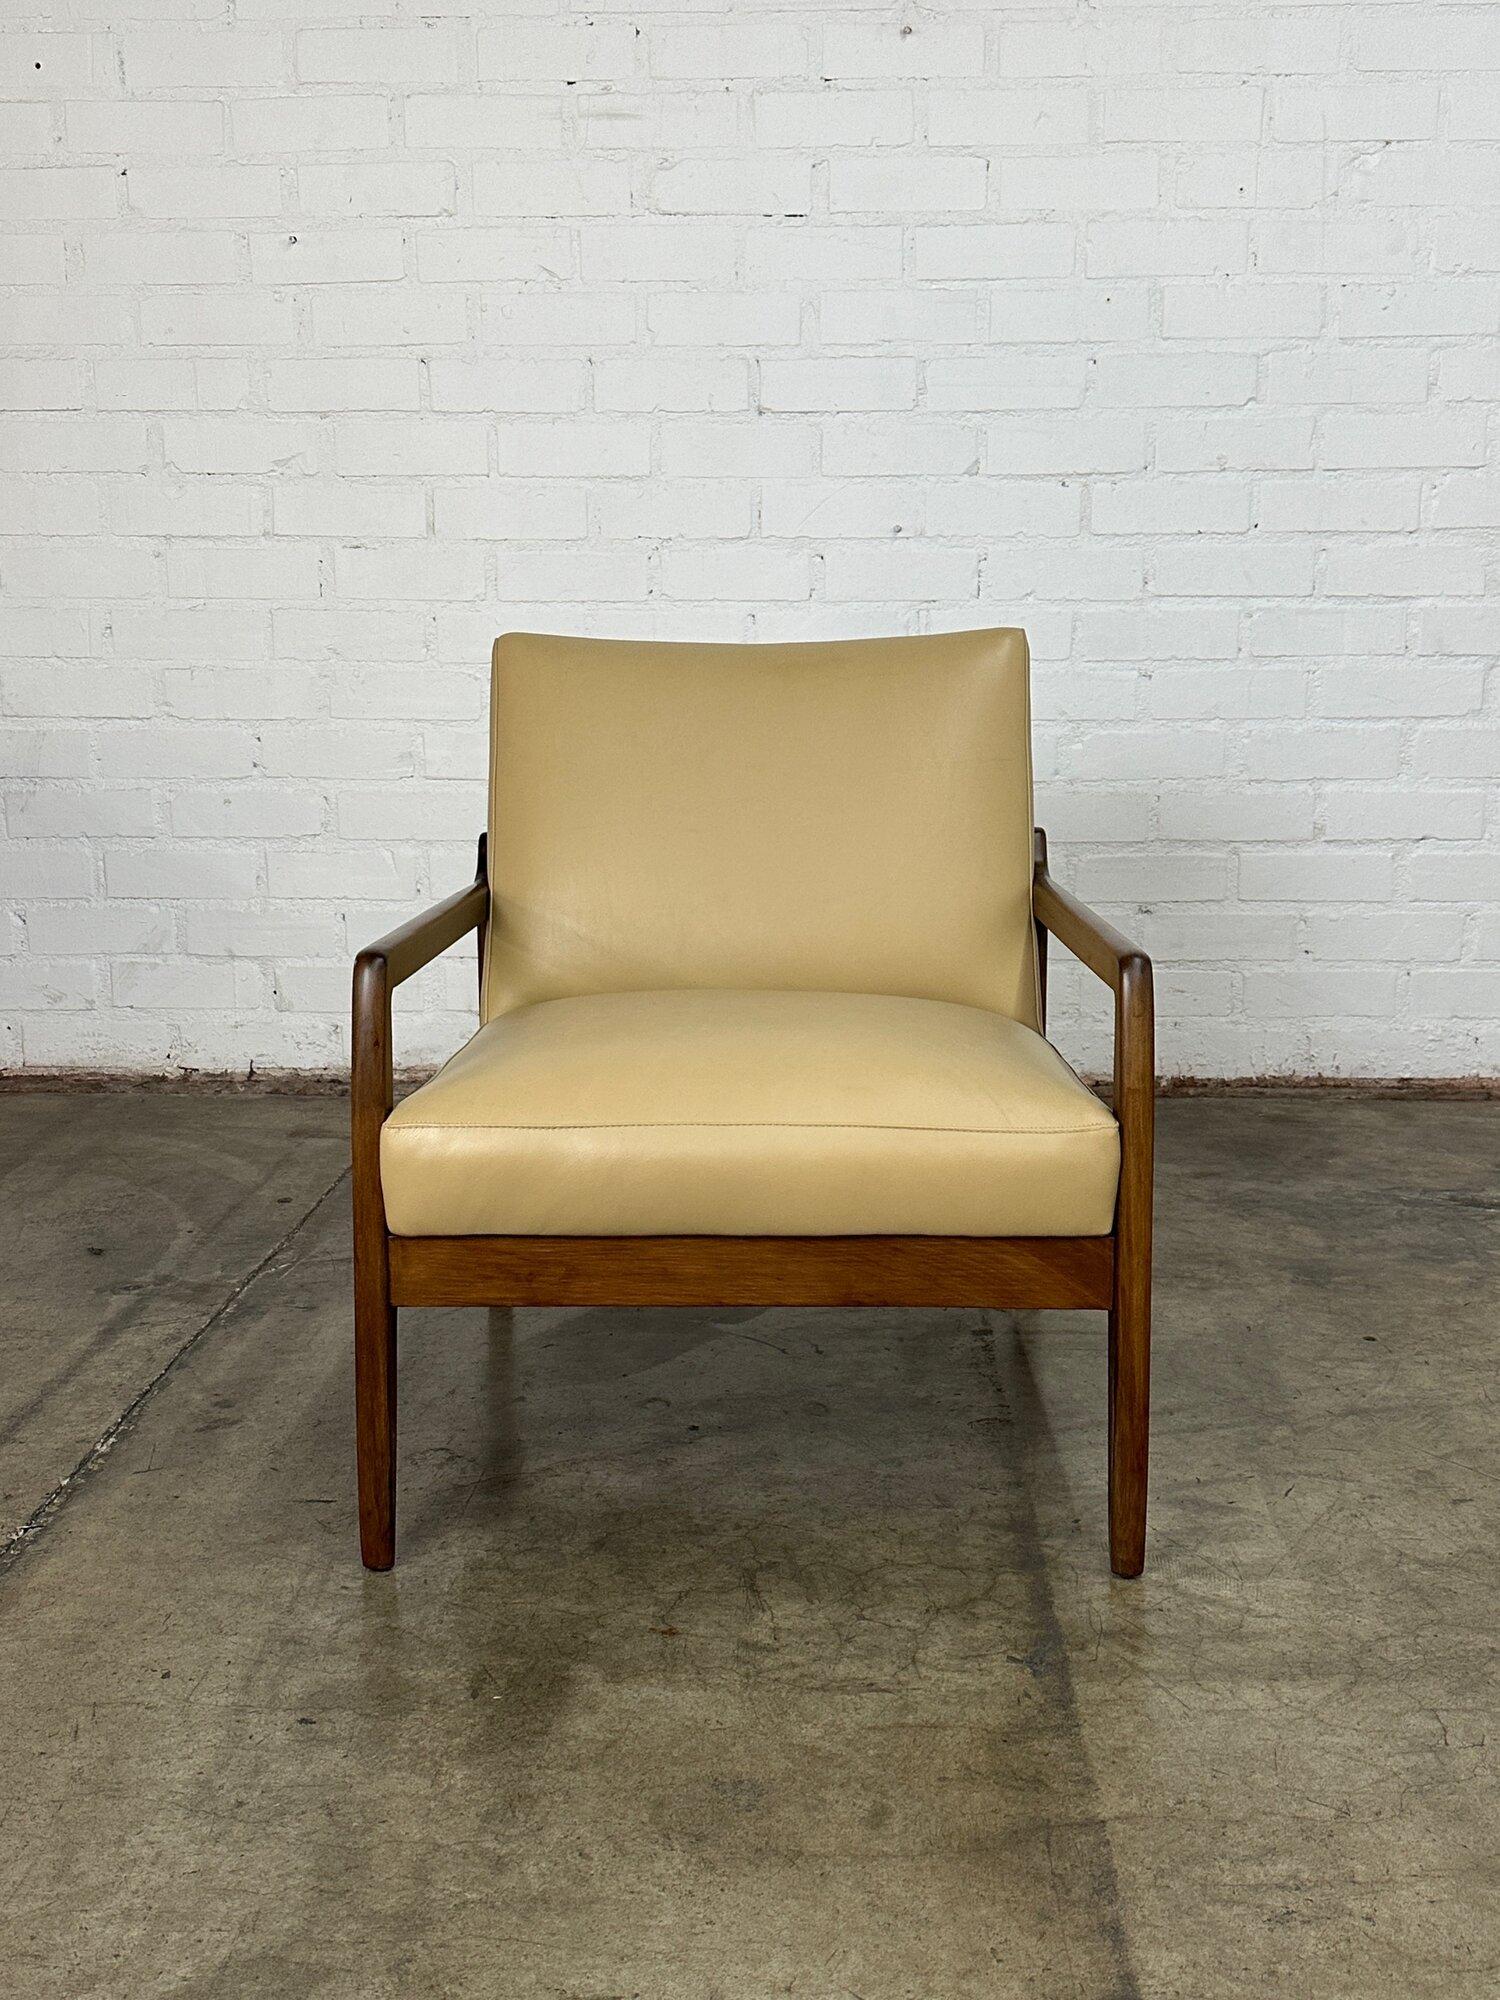 W26.5 D30 H31 SW24 SD21 SH16 AH21

1960’s Mid Century Modern fully refinished and newly upholstered Lounge Chair. Chair is made of solid wood and finished in a walnut stain. Upholstered in a warm deep beige leather.